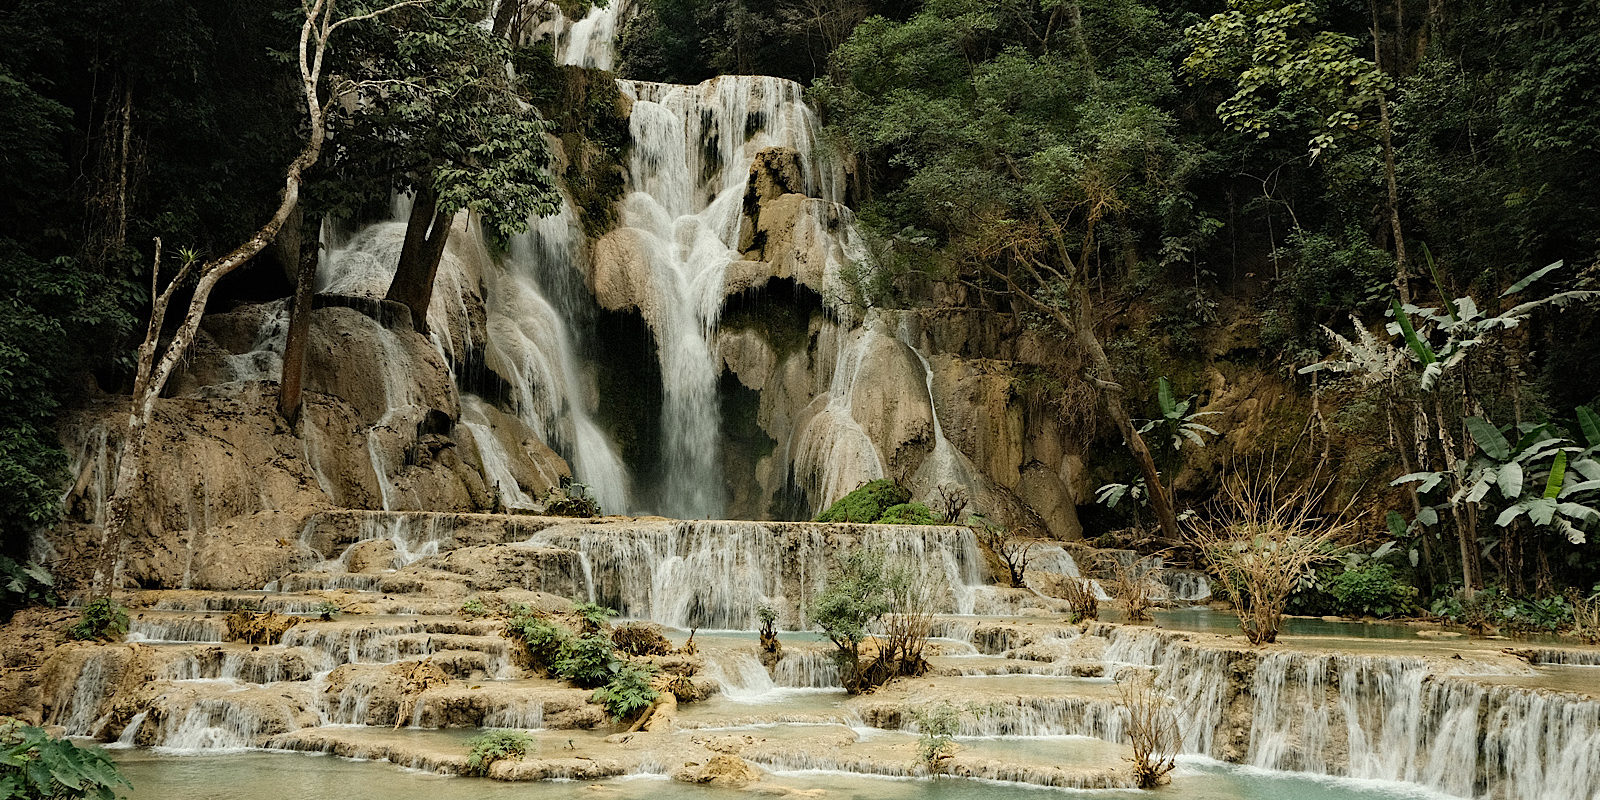 Kuang Si Waterfall in Laos, a picturesque natural wonder surrounded by lush greenery and cascading waters.